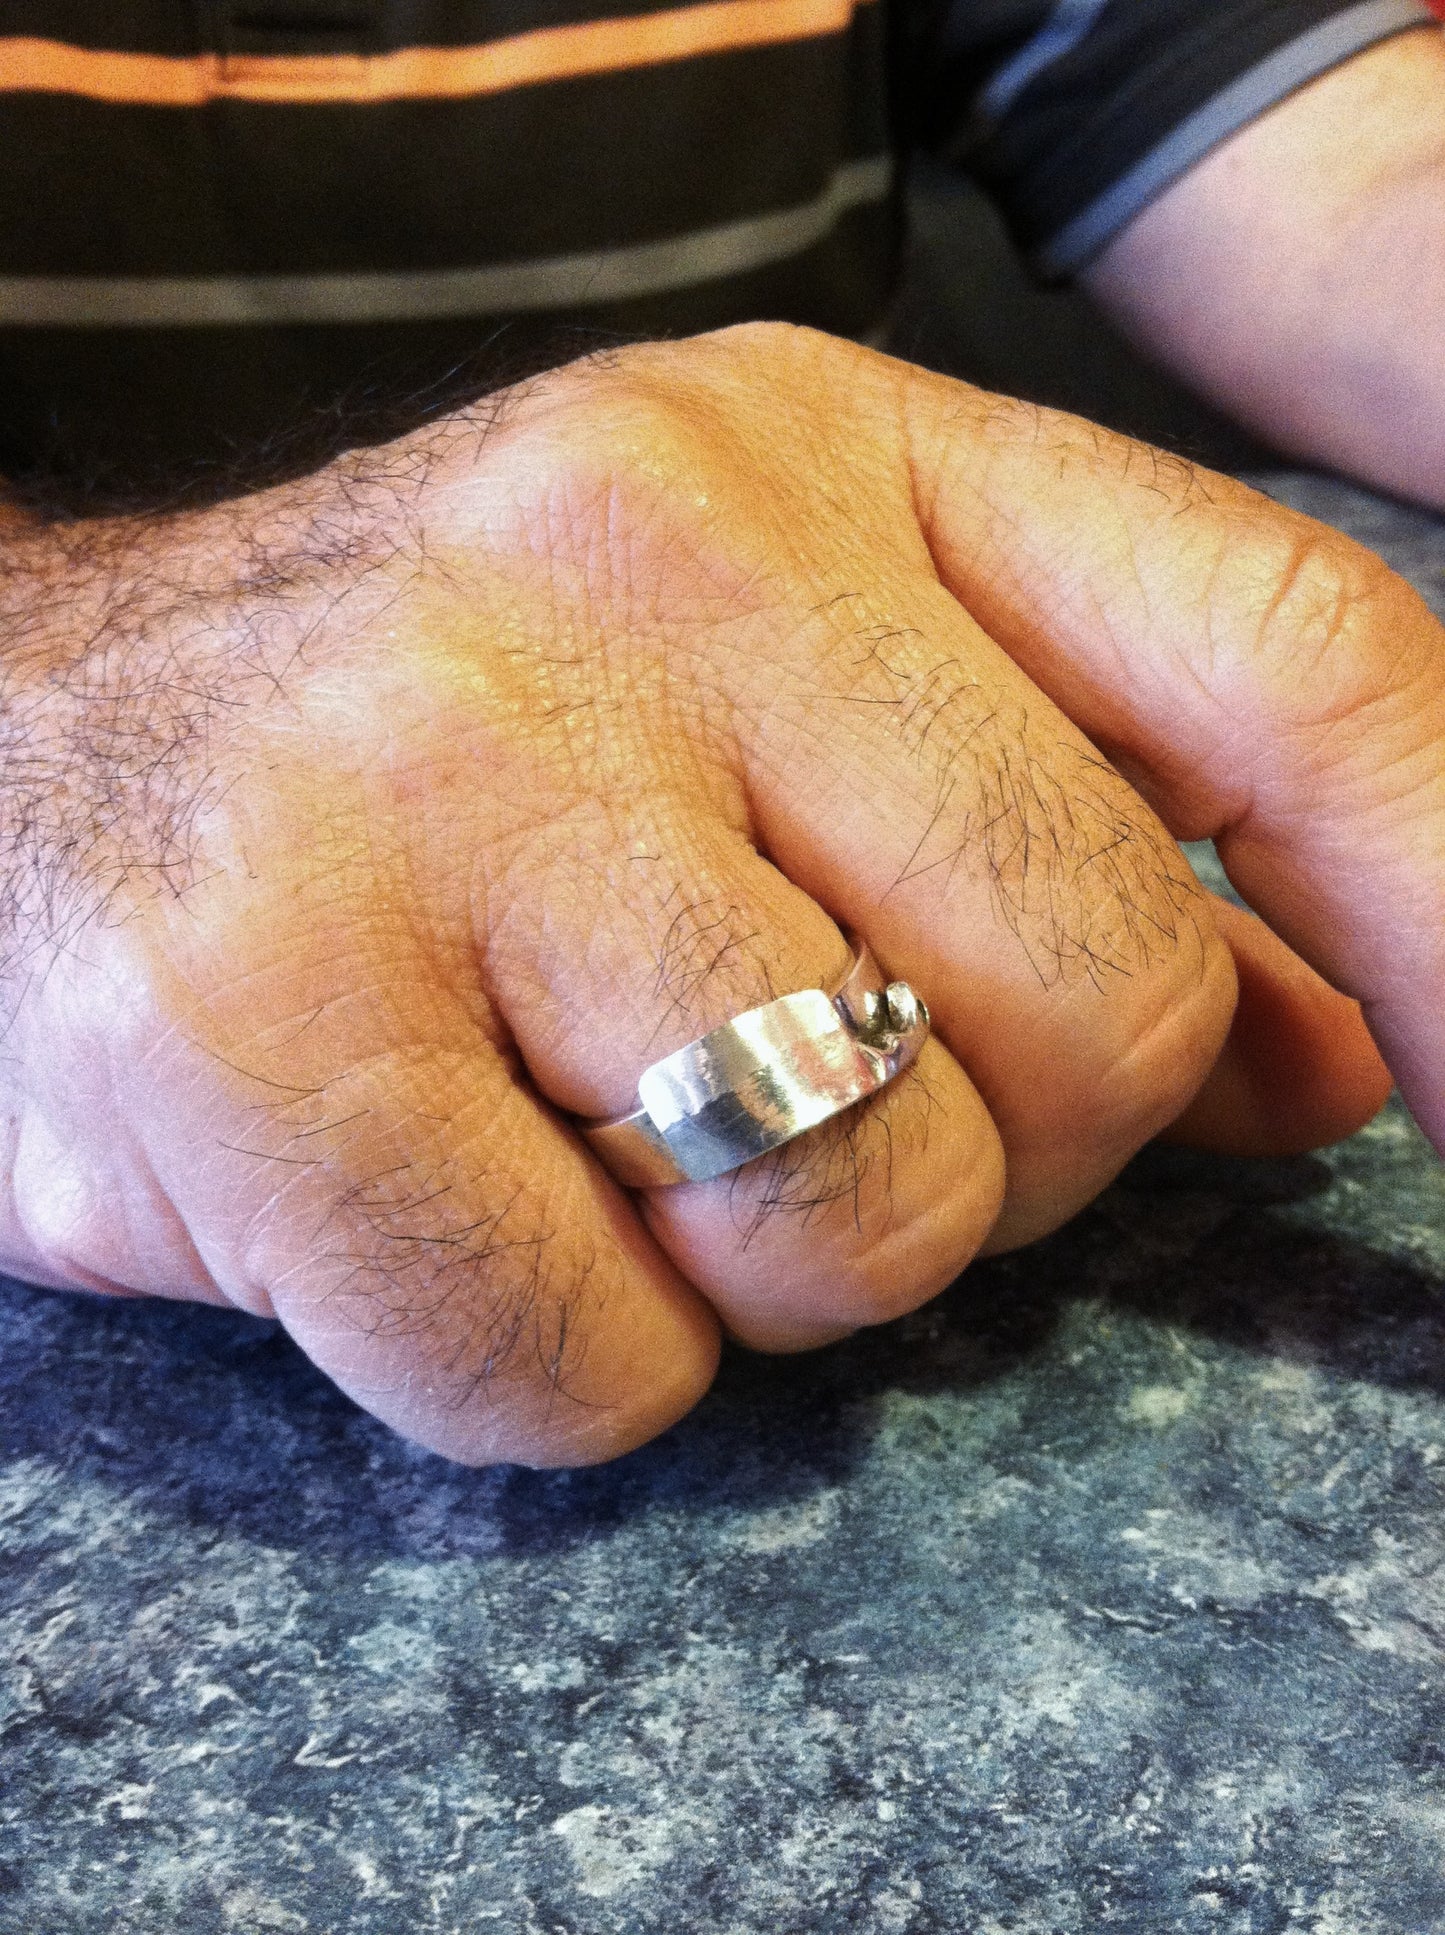 Chef's Cleaver Knife Ring in Sterling Silver